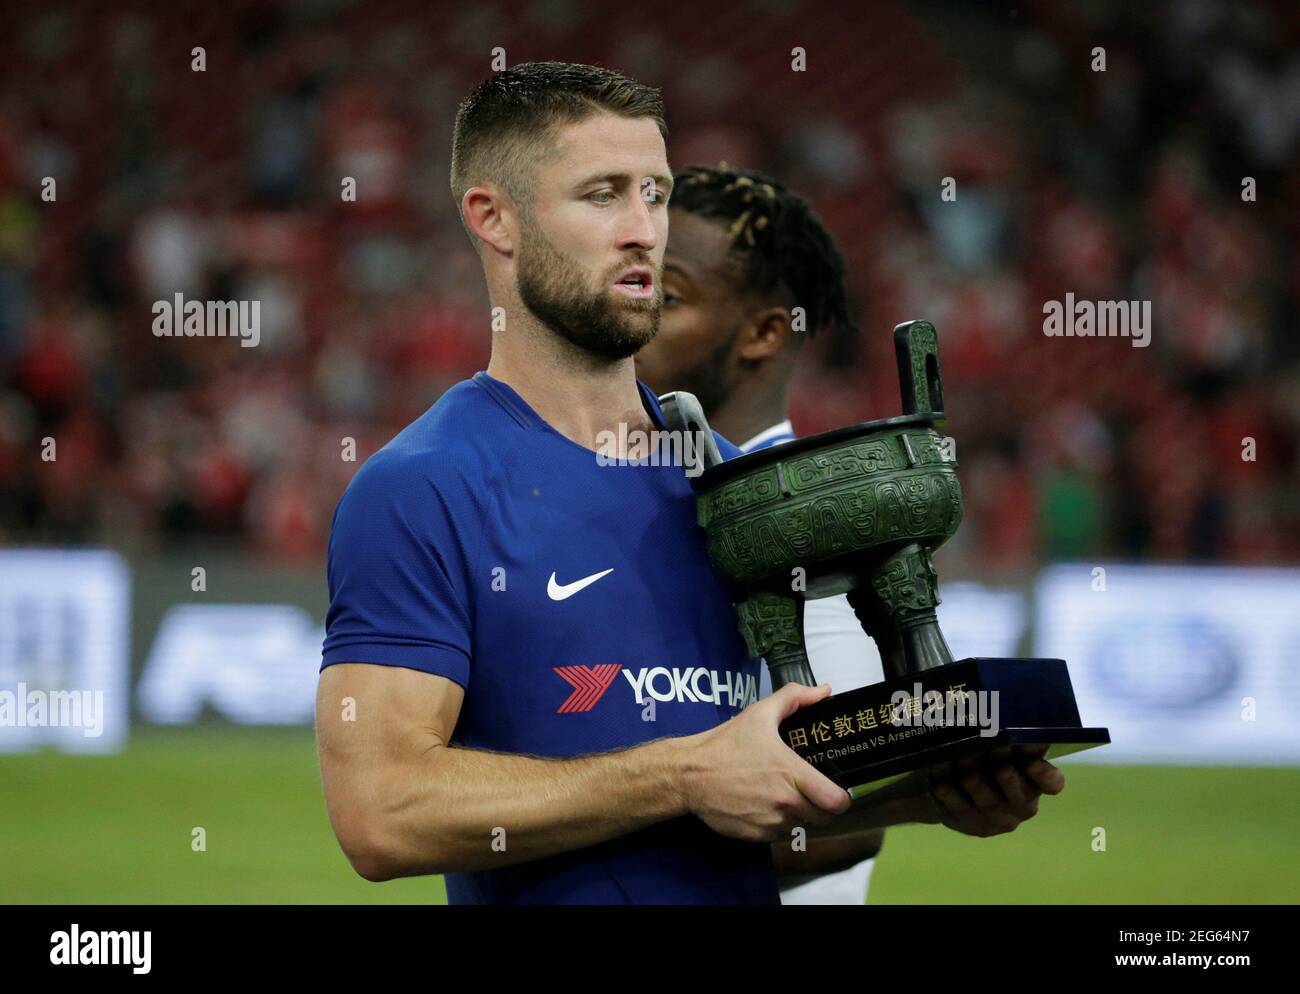 Soccer Football - Arsenal v Chelsea - Pre Season Friendly - June 22, 2017   Chelsea's Gary Cahill with trophy at the end of the match    REUTERS/JASON LEE Stock Photo